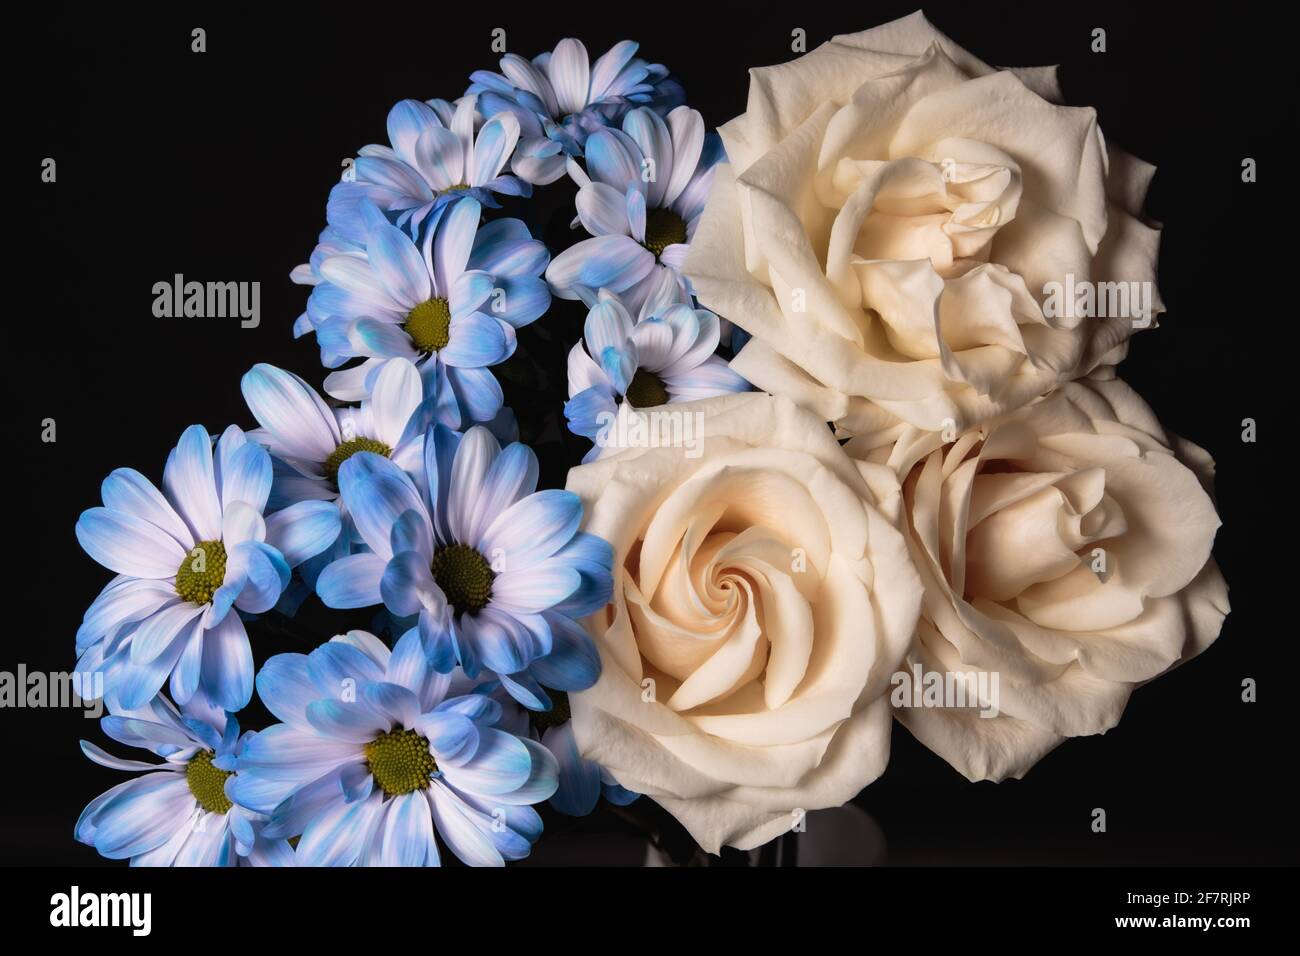 Bouquet of blue chrysanthemum and cream roses on a dark background Stock Photo